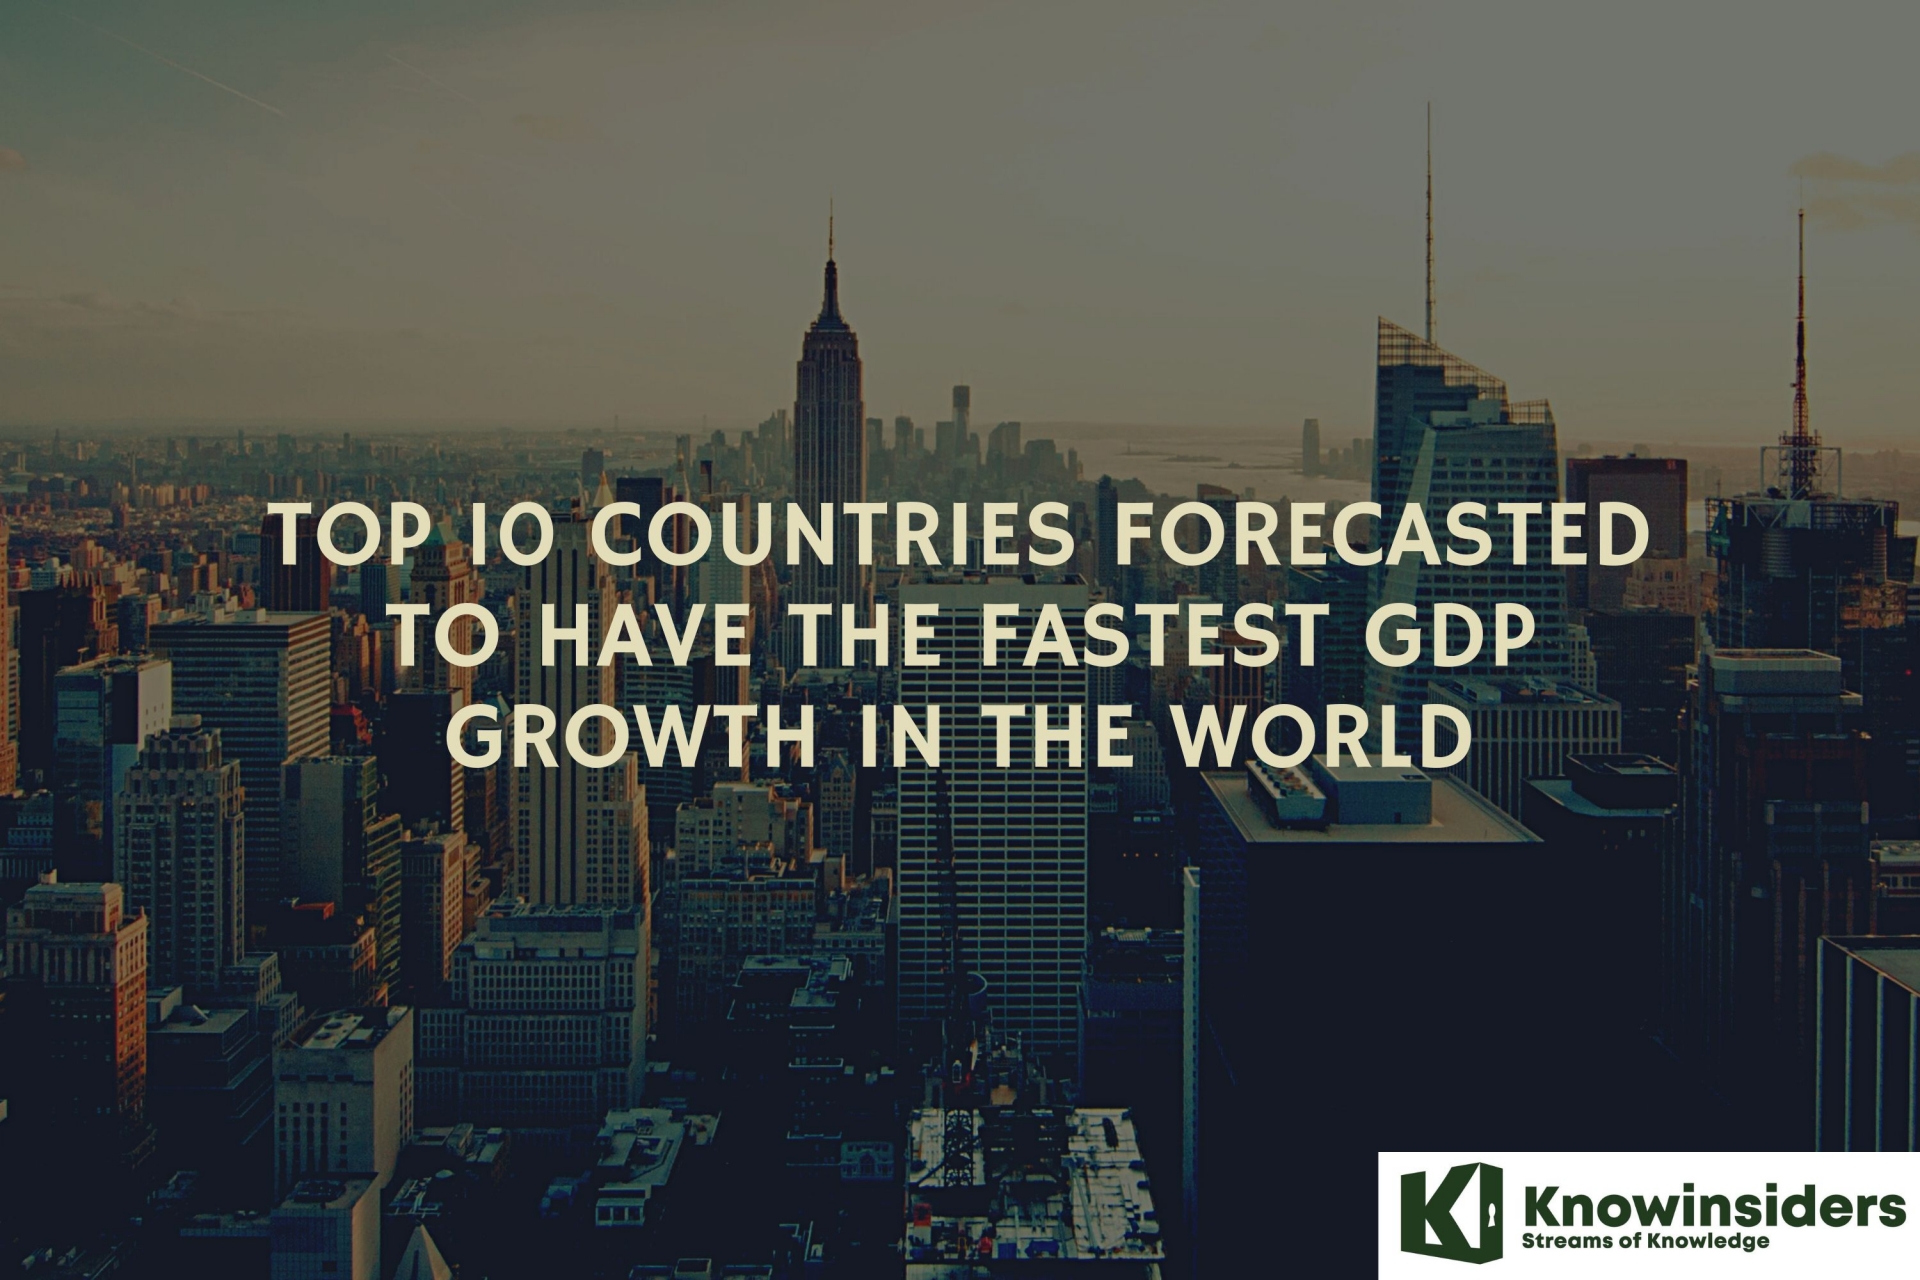 Top 10 Countries Forecasted To Have The Fastest GDP Growth in The World in The Next 8 Years